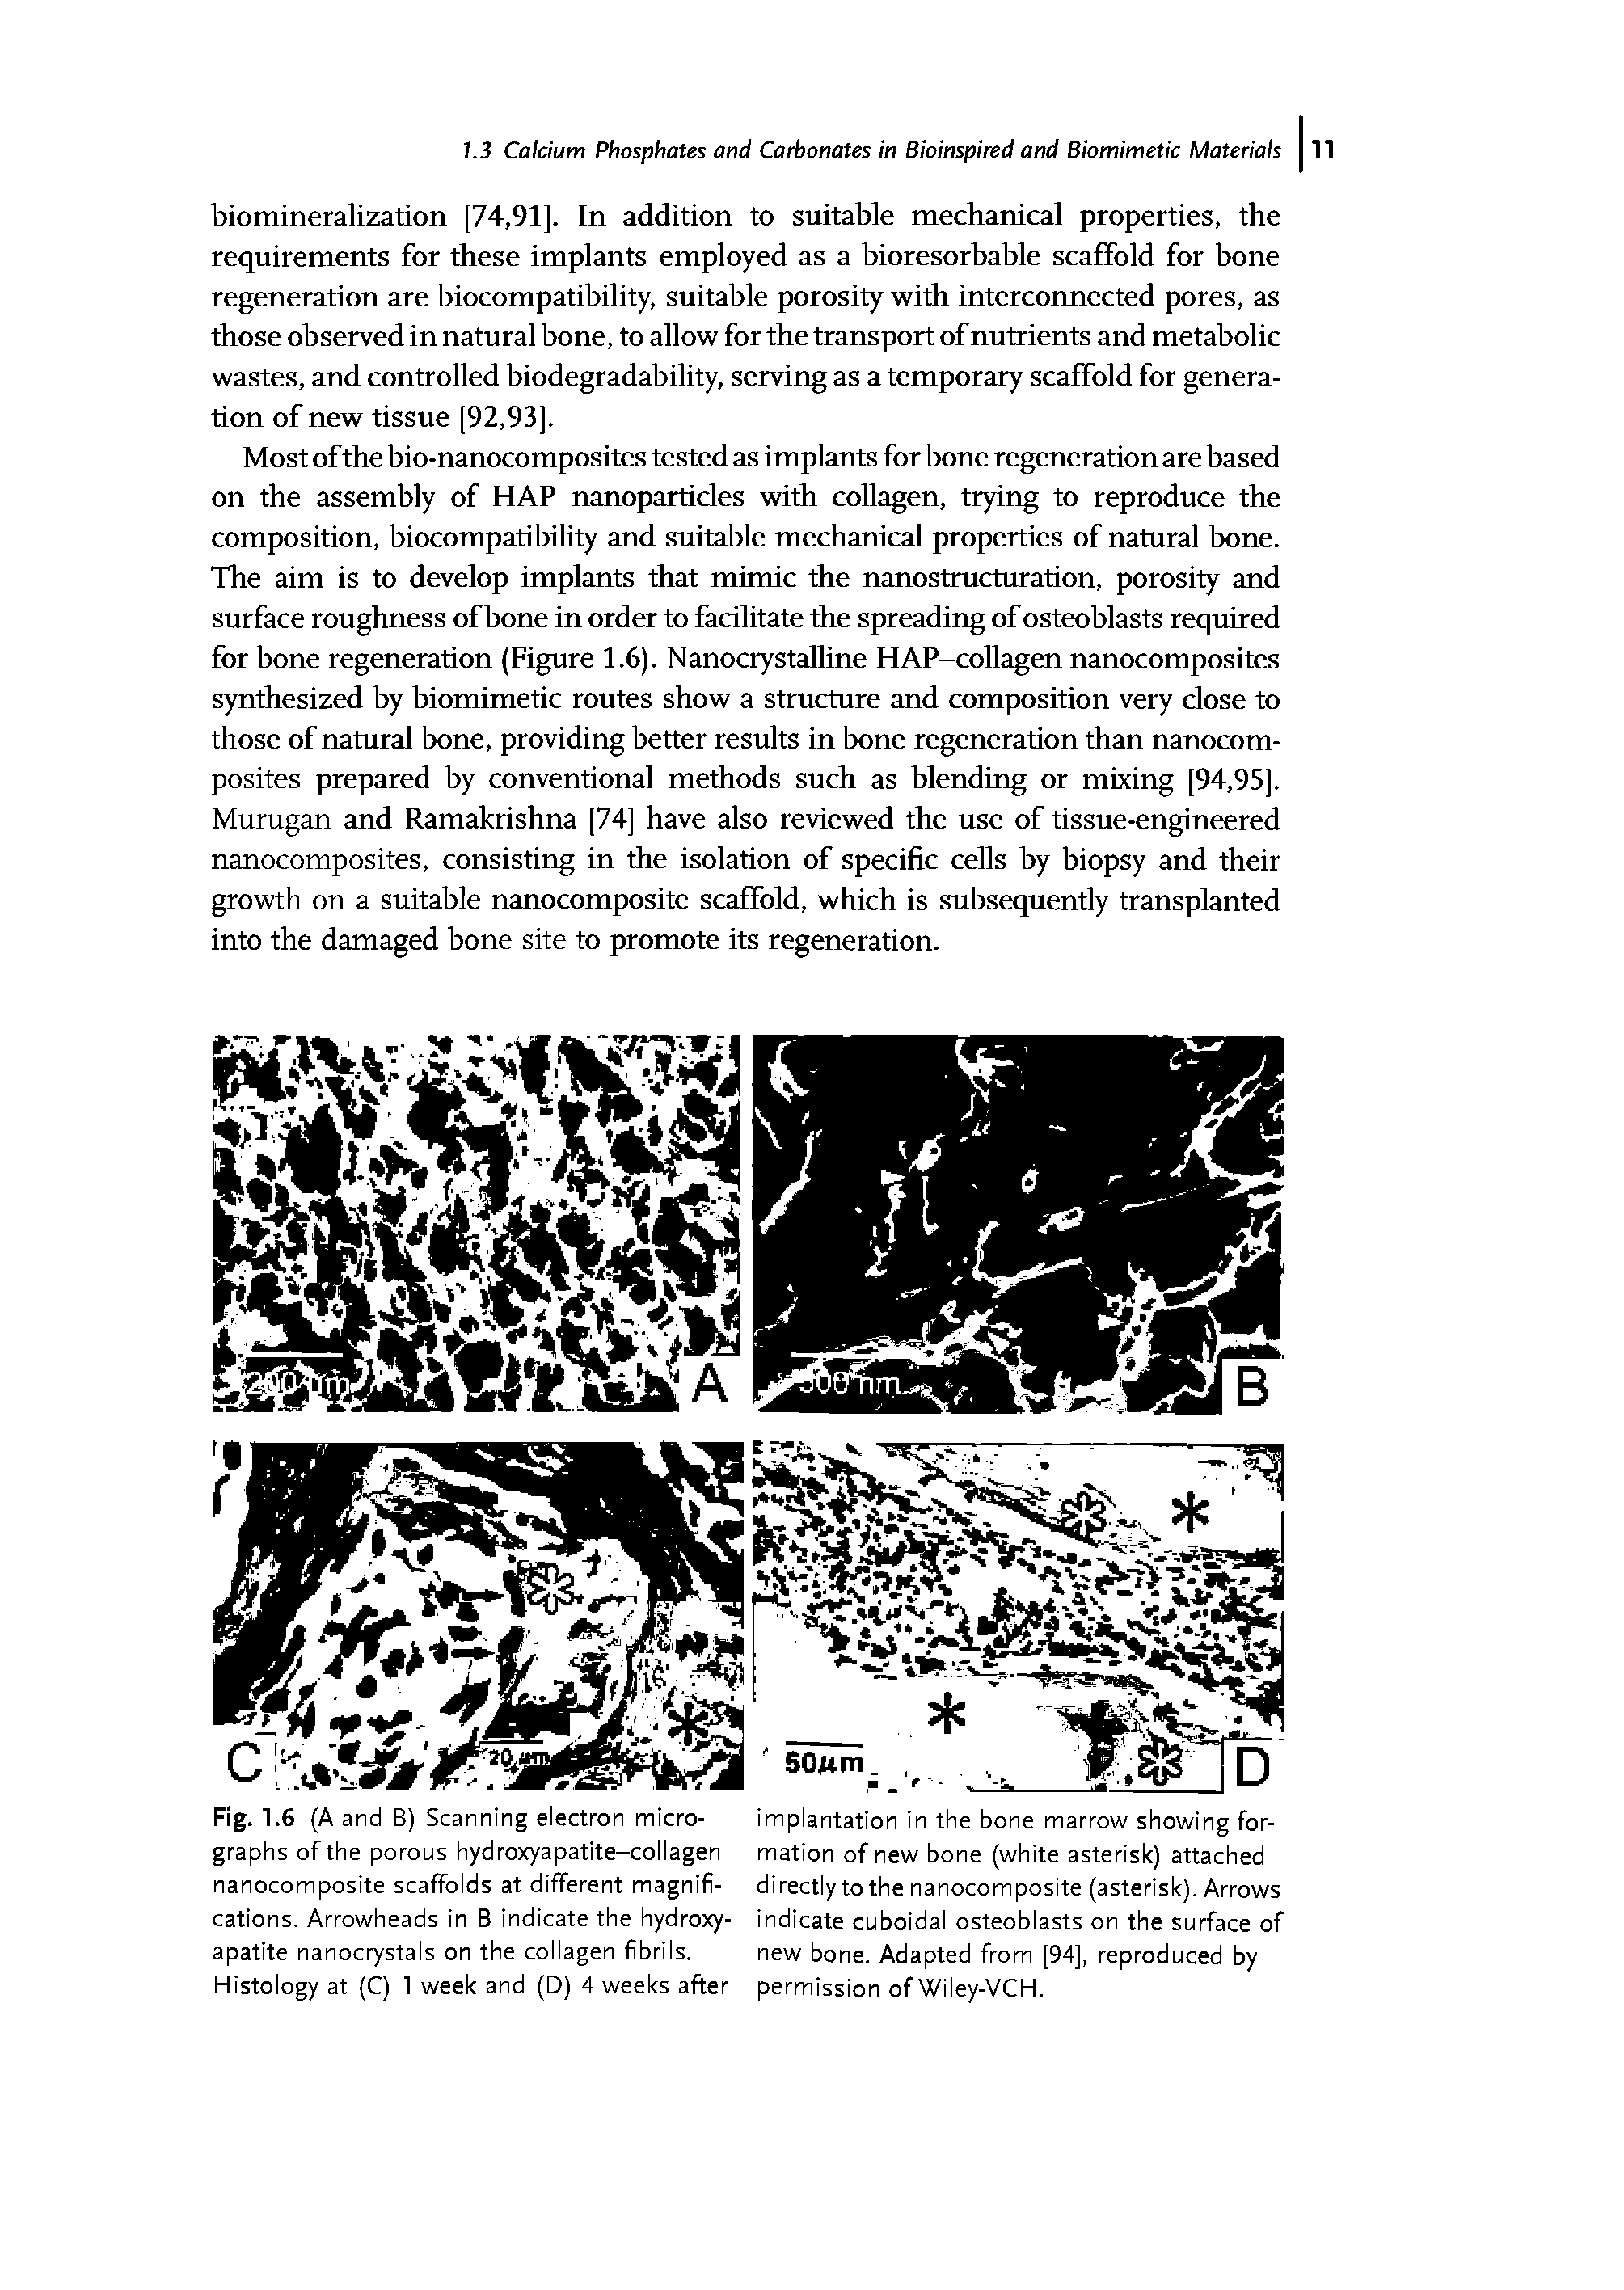 Fig. 1.6 (A and B) Scanning electron micro- implantation in the bone marrow showing for-graphs of the porous hydroxyapatite-collagen mation of new bone (white asterisk) attached nanocomposite scaffolds at different magnifi- directly to the nanocomposite (asterisk). Arrows cations. Arrowheads in B indicate the hydroxy- indicate cuboidal osteoblasts on the surface of apatite nanocrystals on the collagen fibrils. new bone. Adapted from [94], reproduced by Histology at (C) 1 week and (D) 4 weeks after permission of Wiley-VCH.